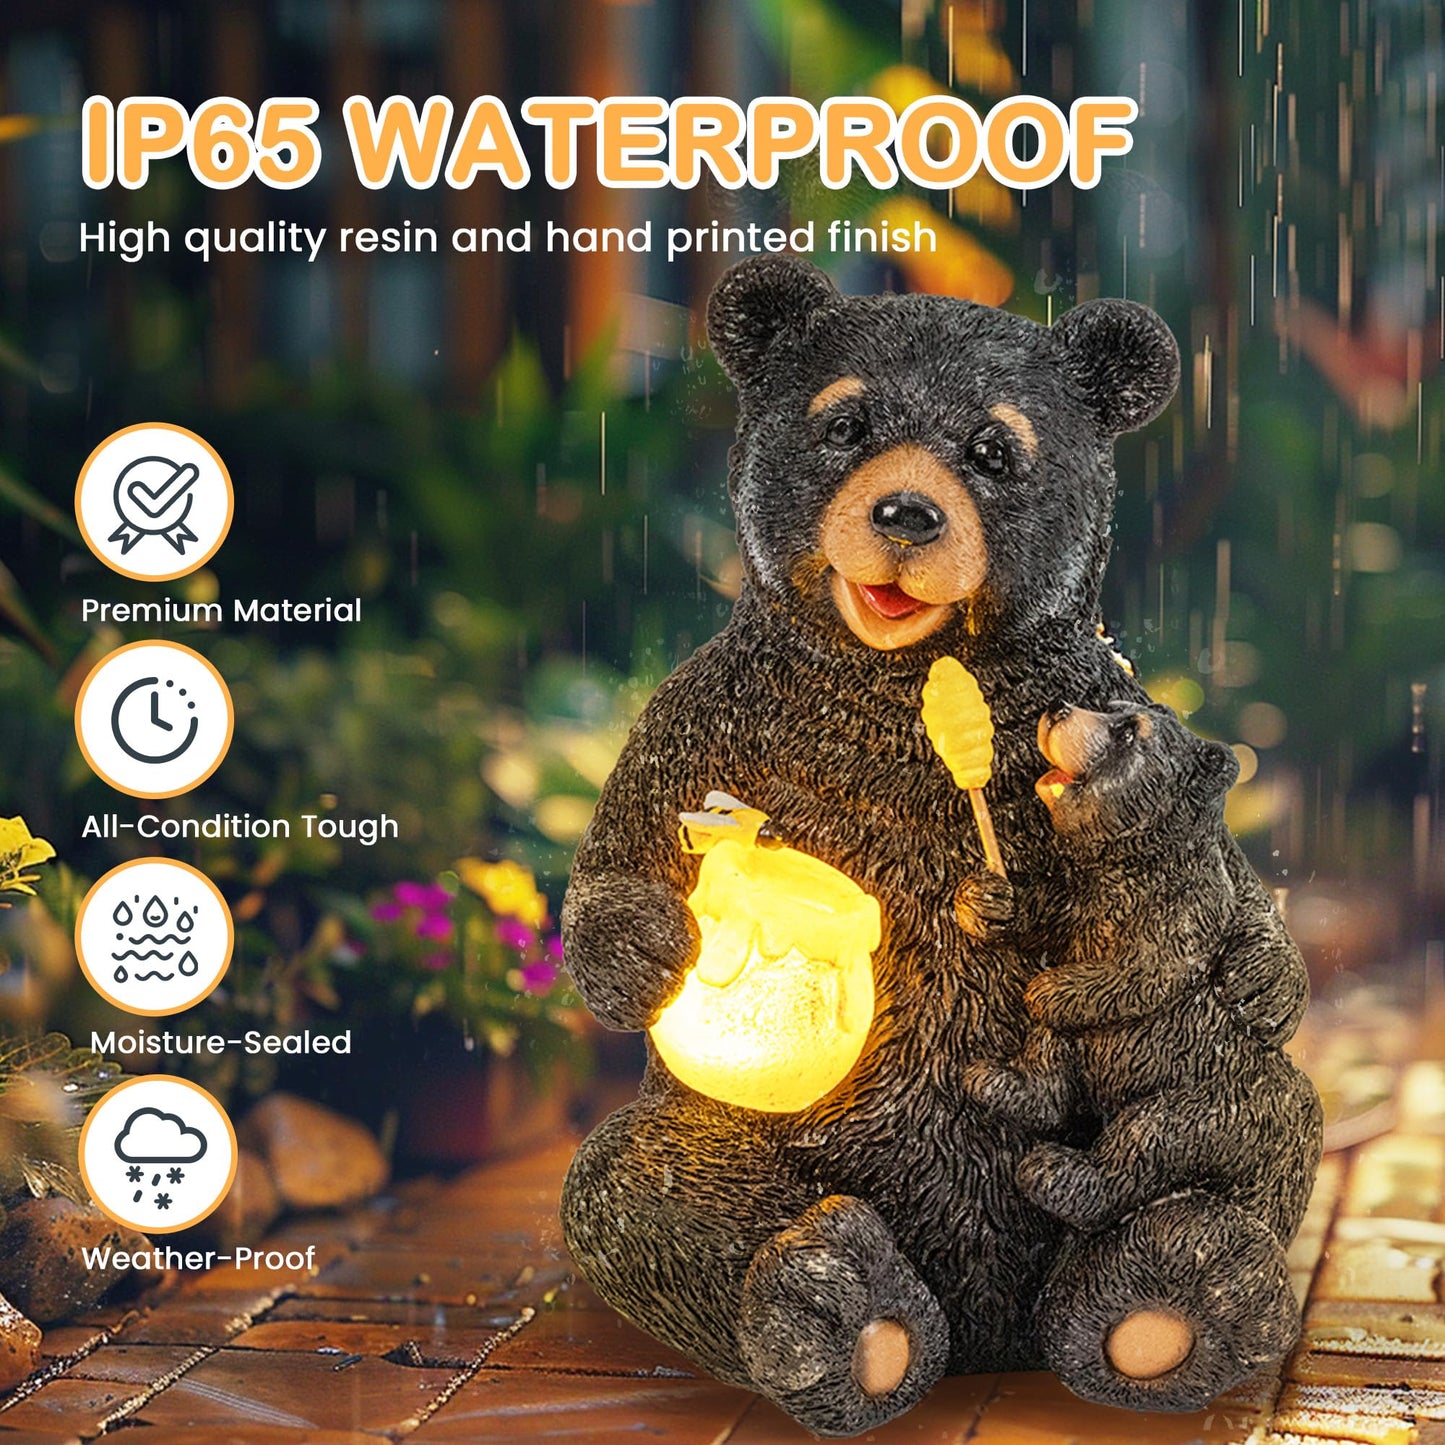 GIGALUMI Solar Garden Statues Loving Bear Figurine Lights for Outside, Yard Decorations Outdoor, Garden Decor Unique Birthday Housewarming Gifts for Mom, Women